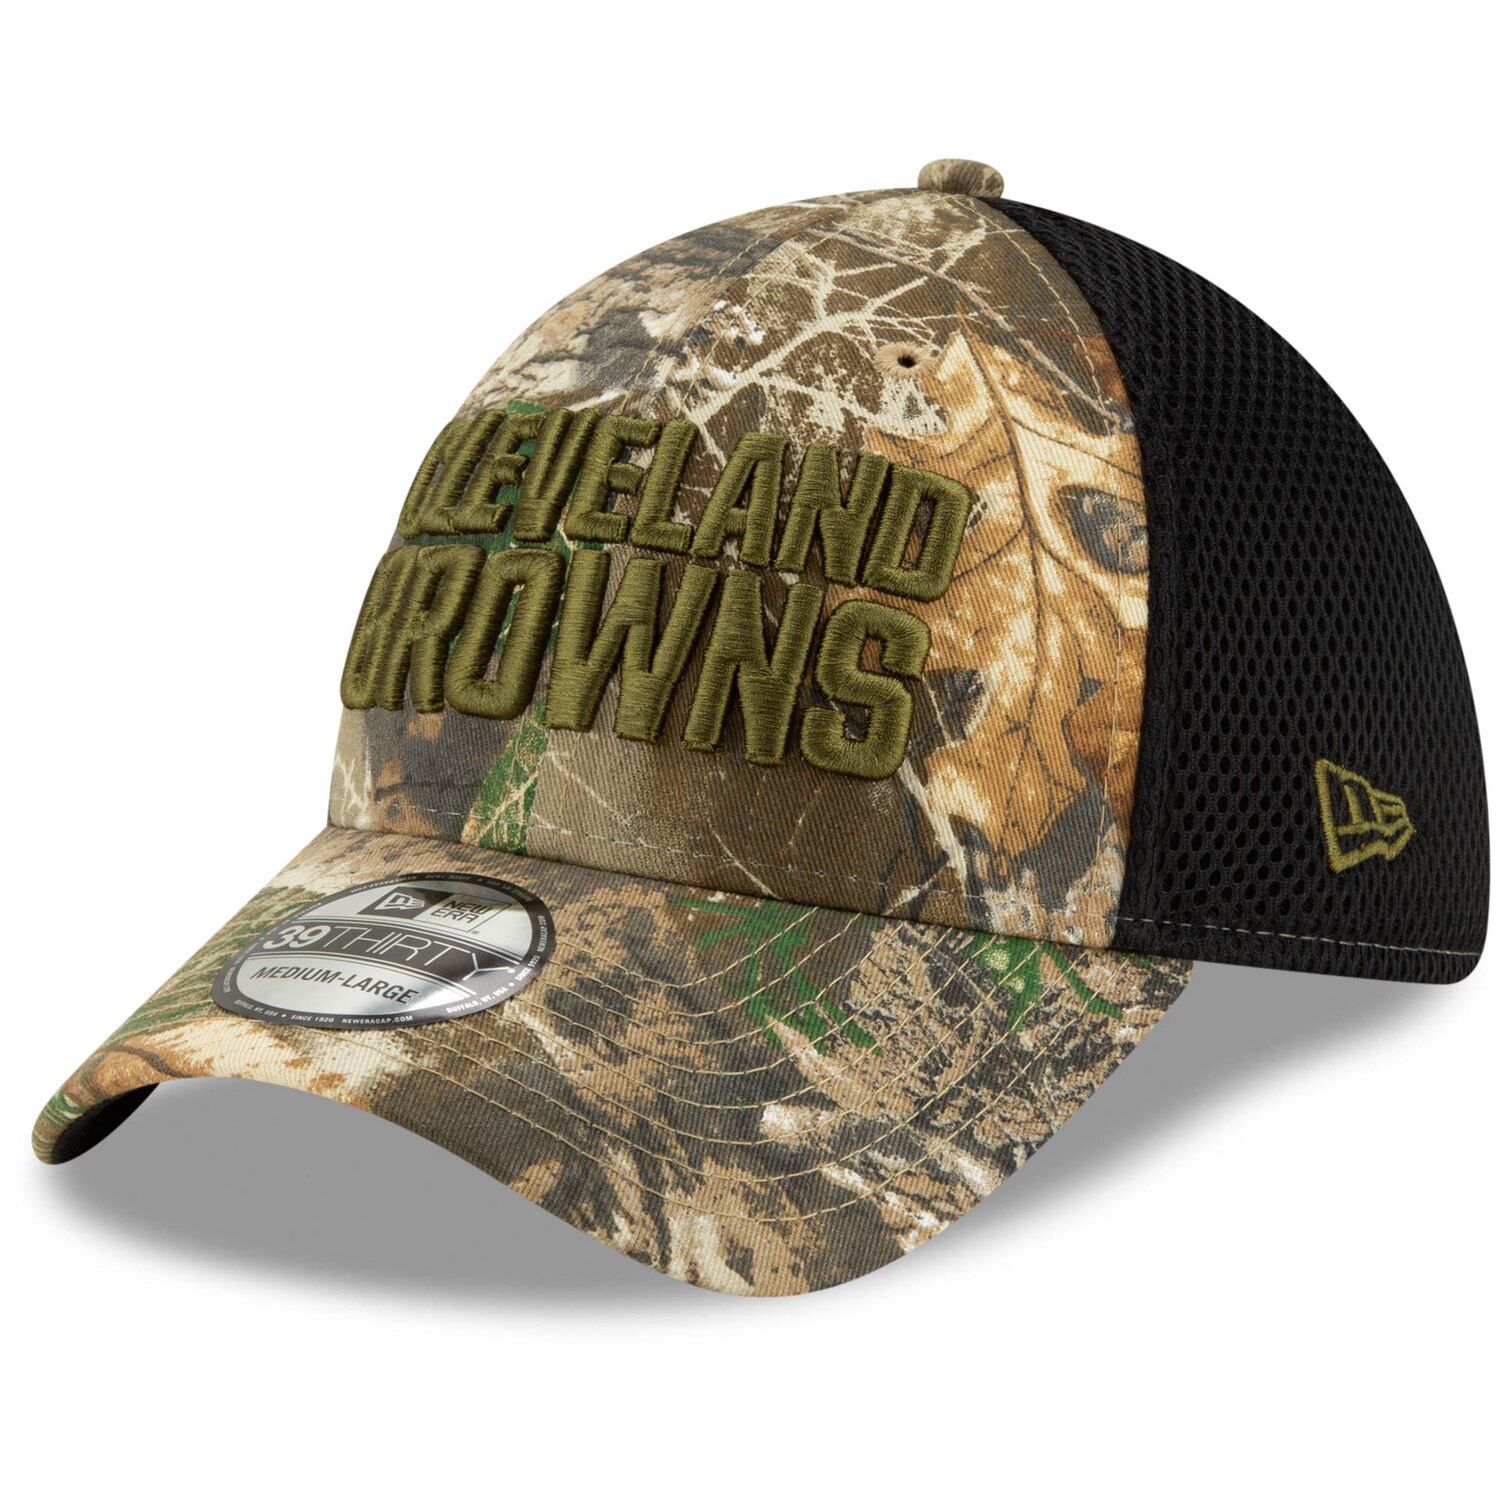 cleveland browns camo hat